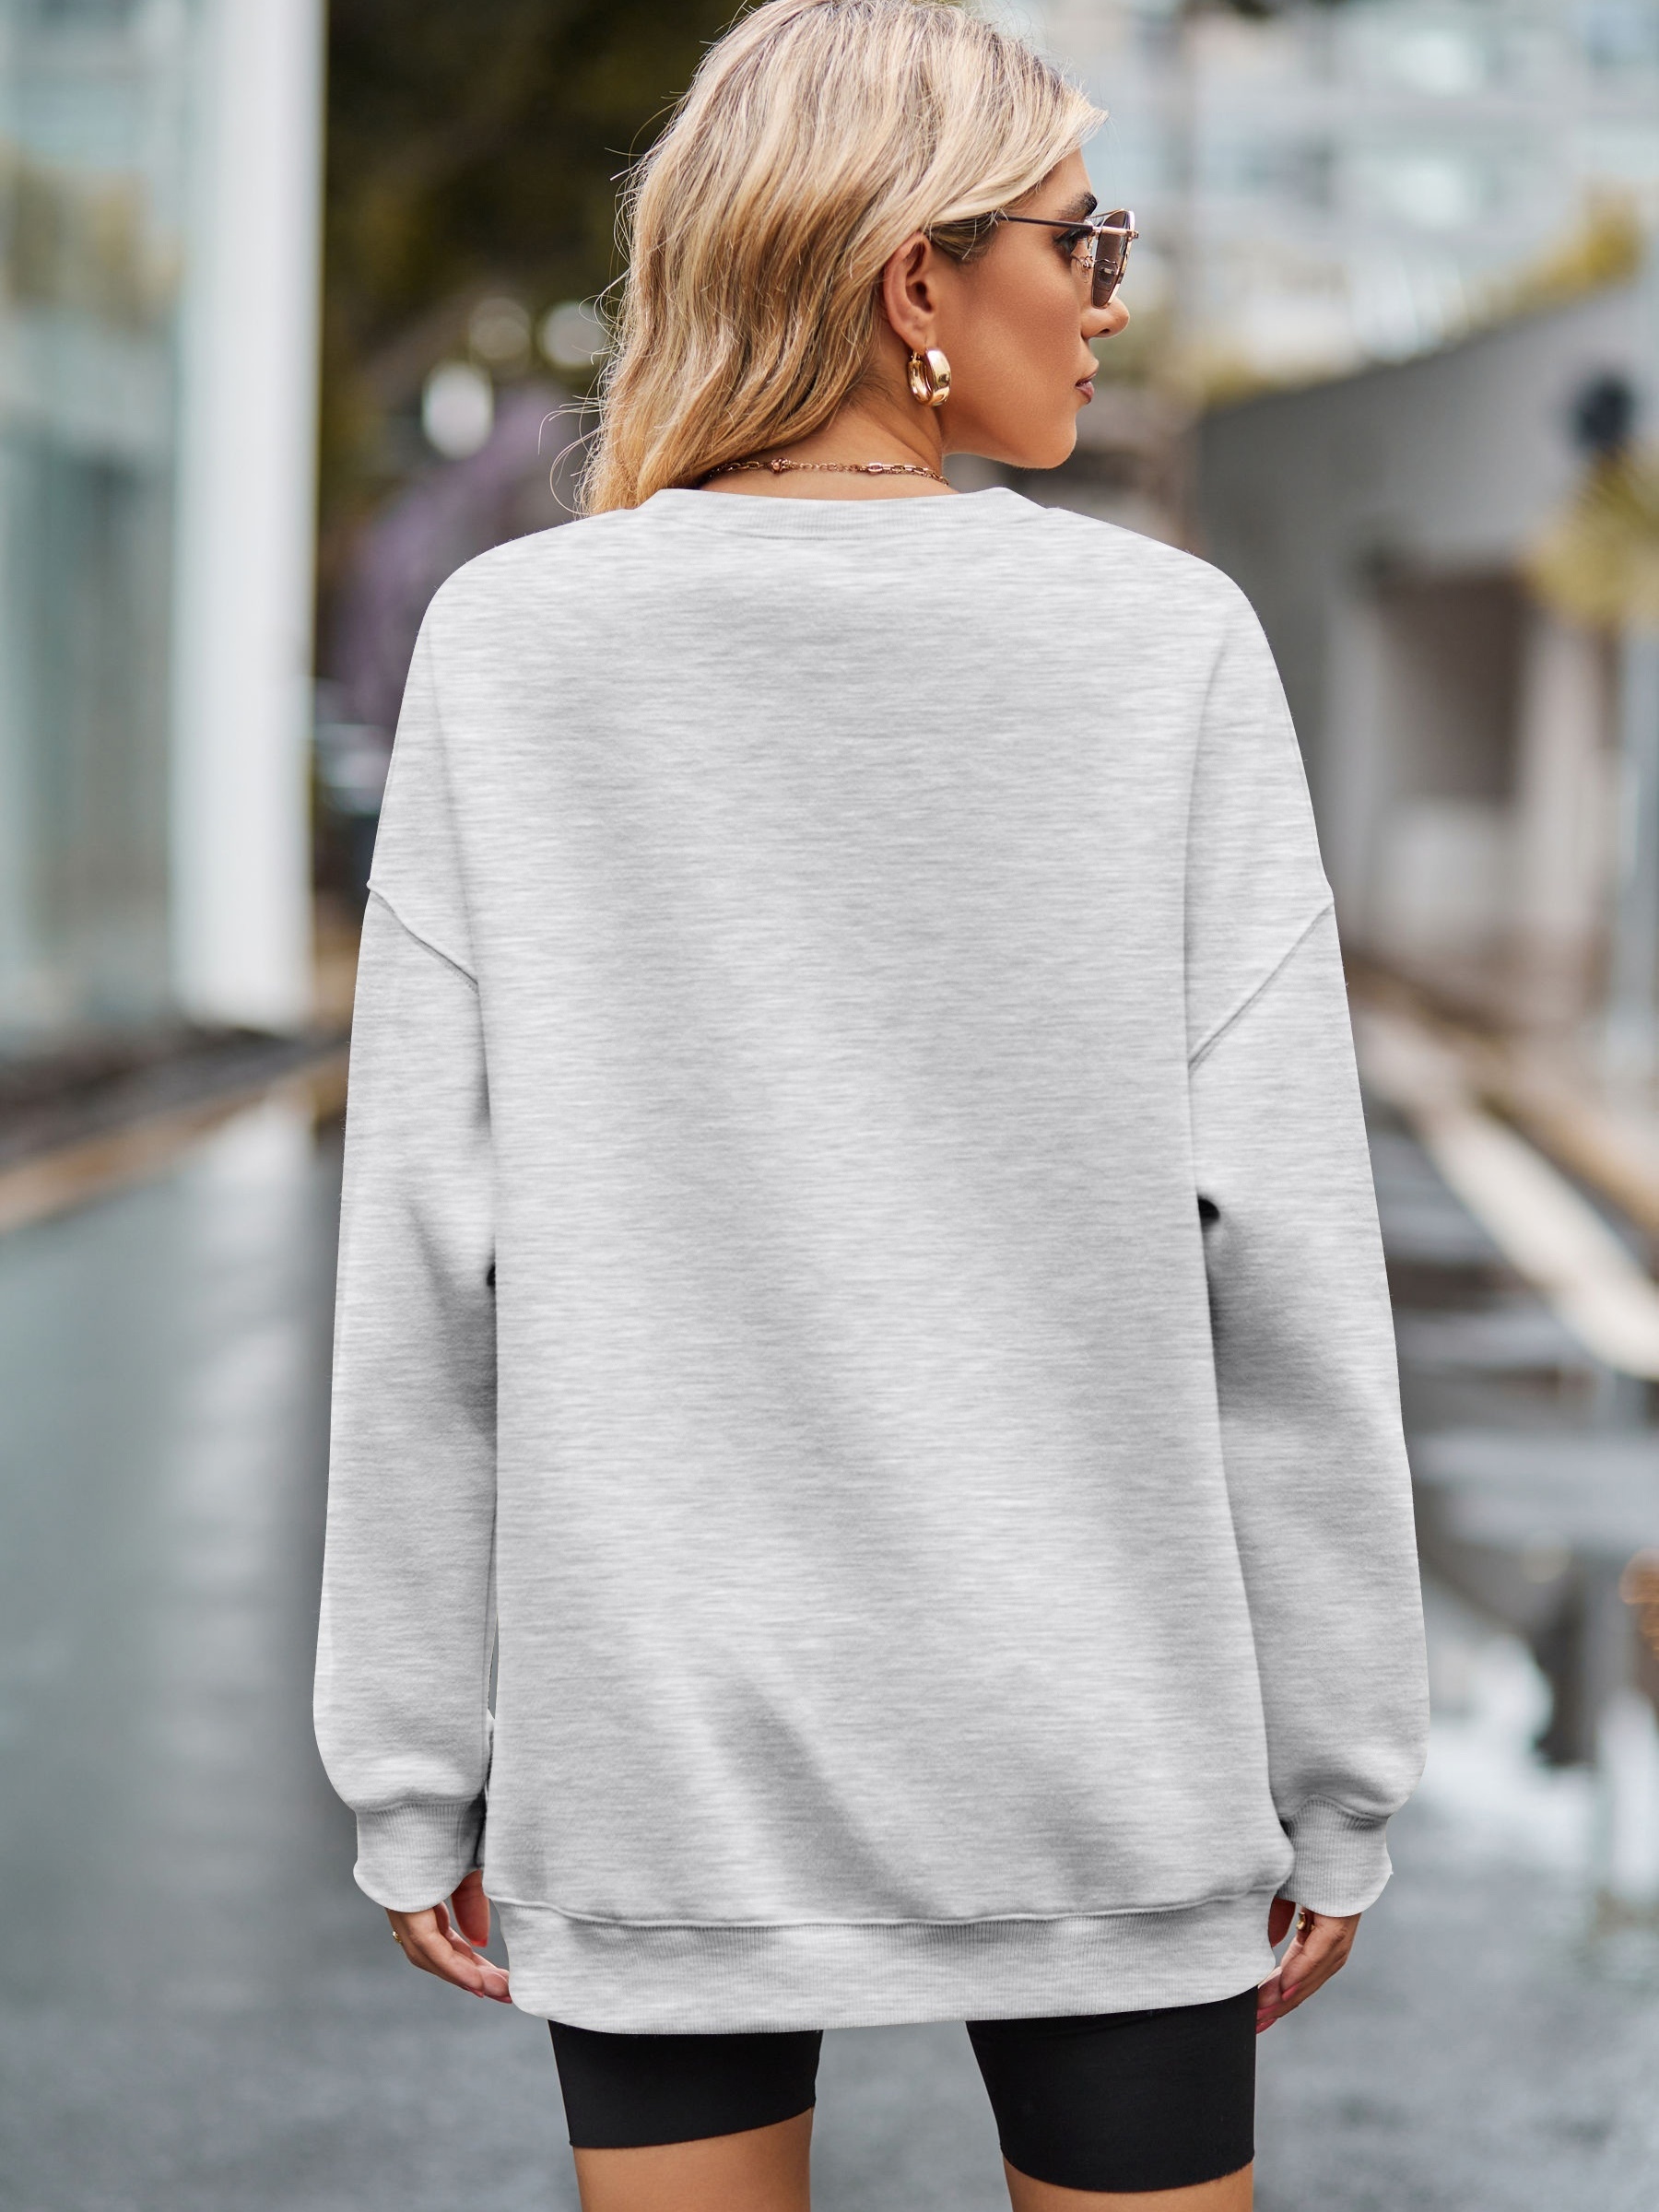 Oversized Sweatshirts for Women Fleece Hoodies Crewneck Pullover Comfy  Clothes Fall Winter Fashion 2023 